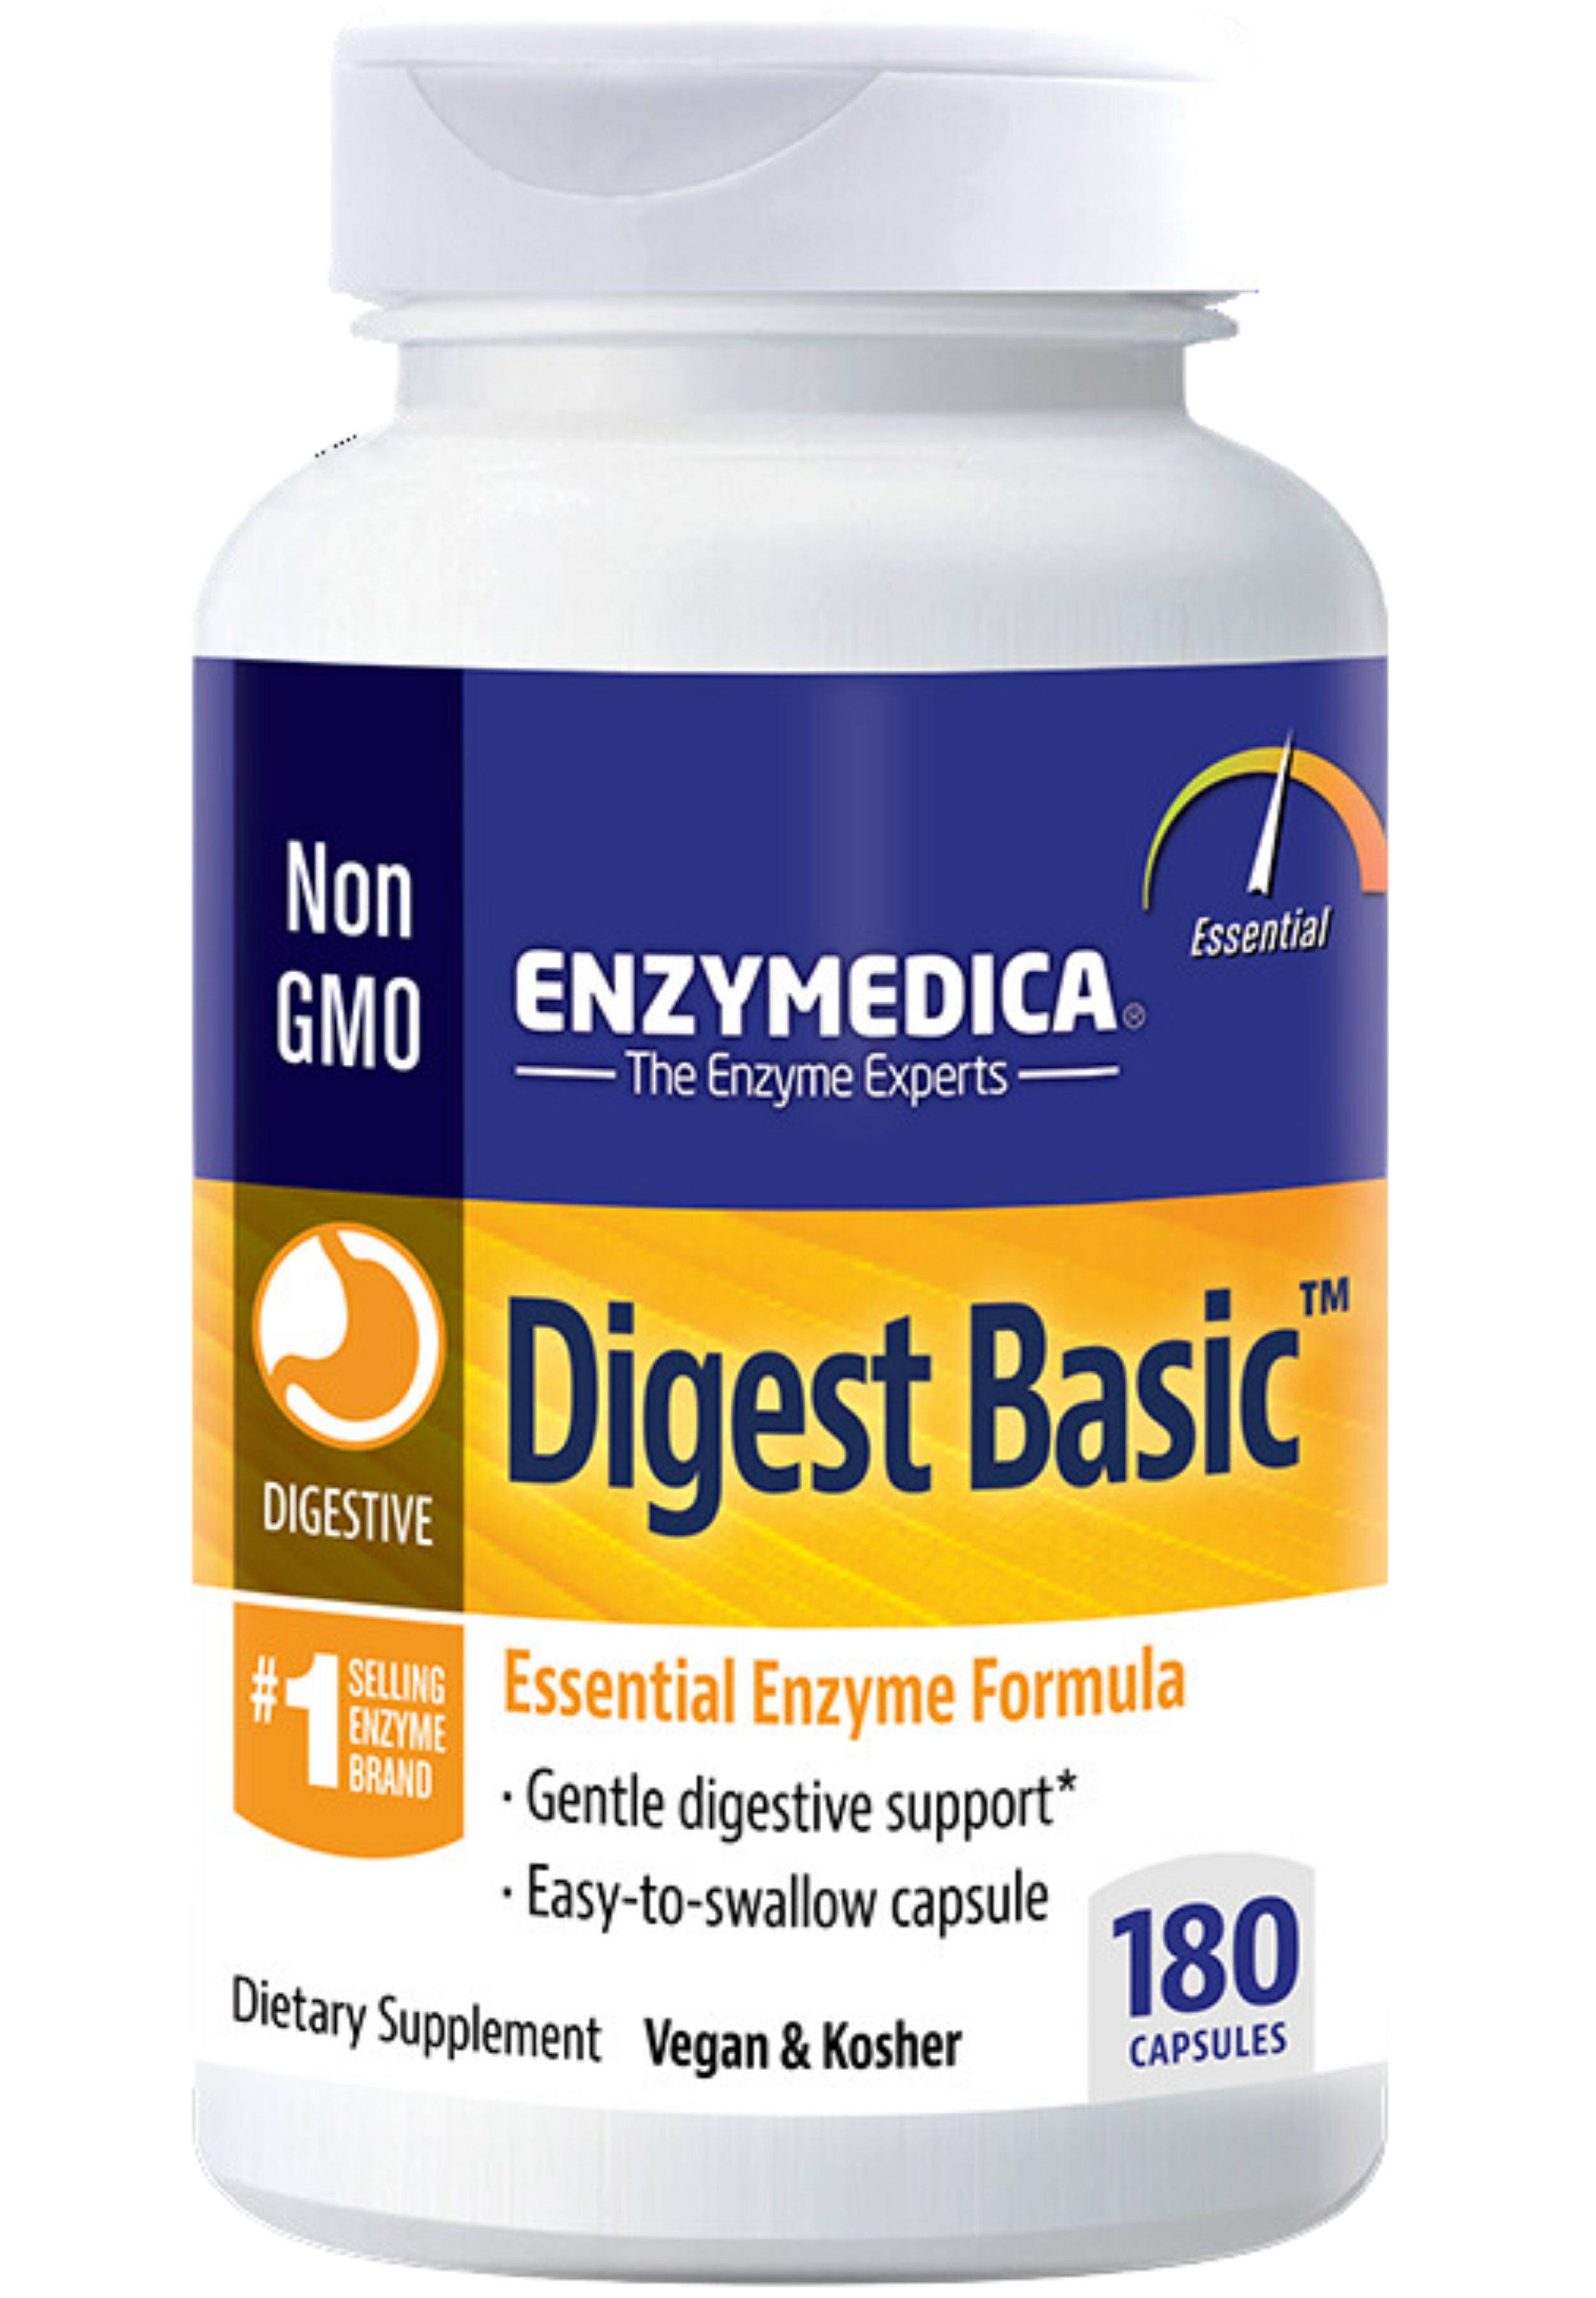 Enzymedica Digest Basic Essential Digestive Enzymes Supplement - 180 Capsules